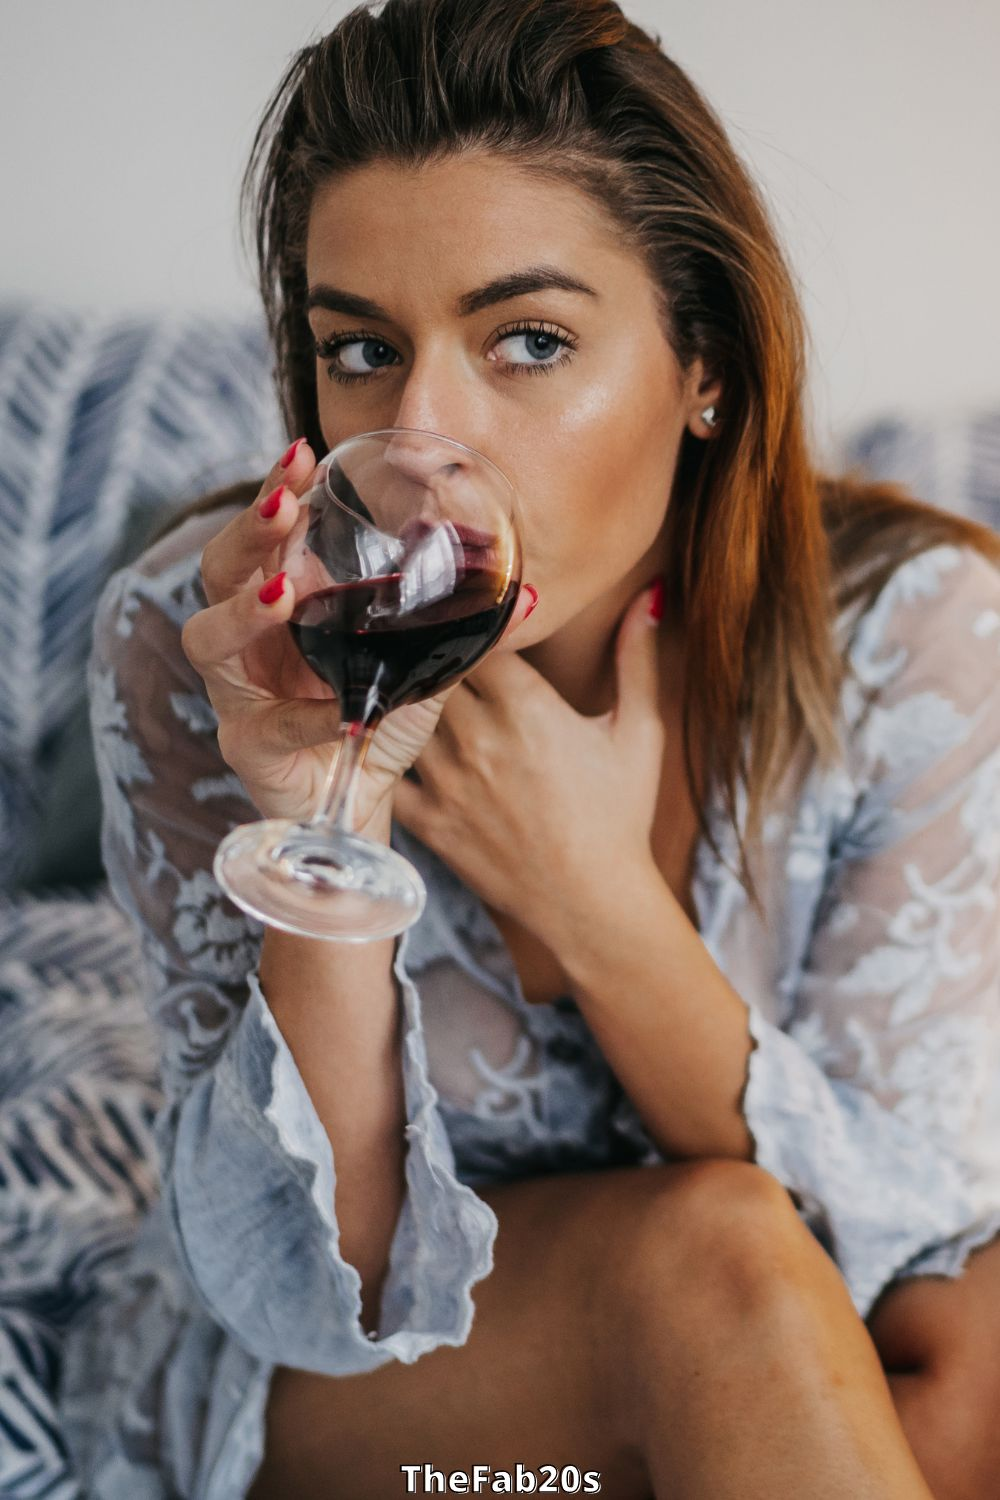 Woman drinking glass of wine - what are the signs your ex wants you back?